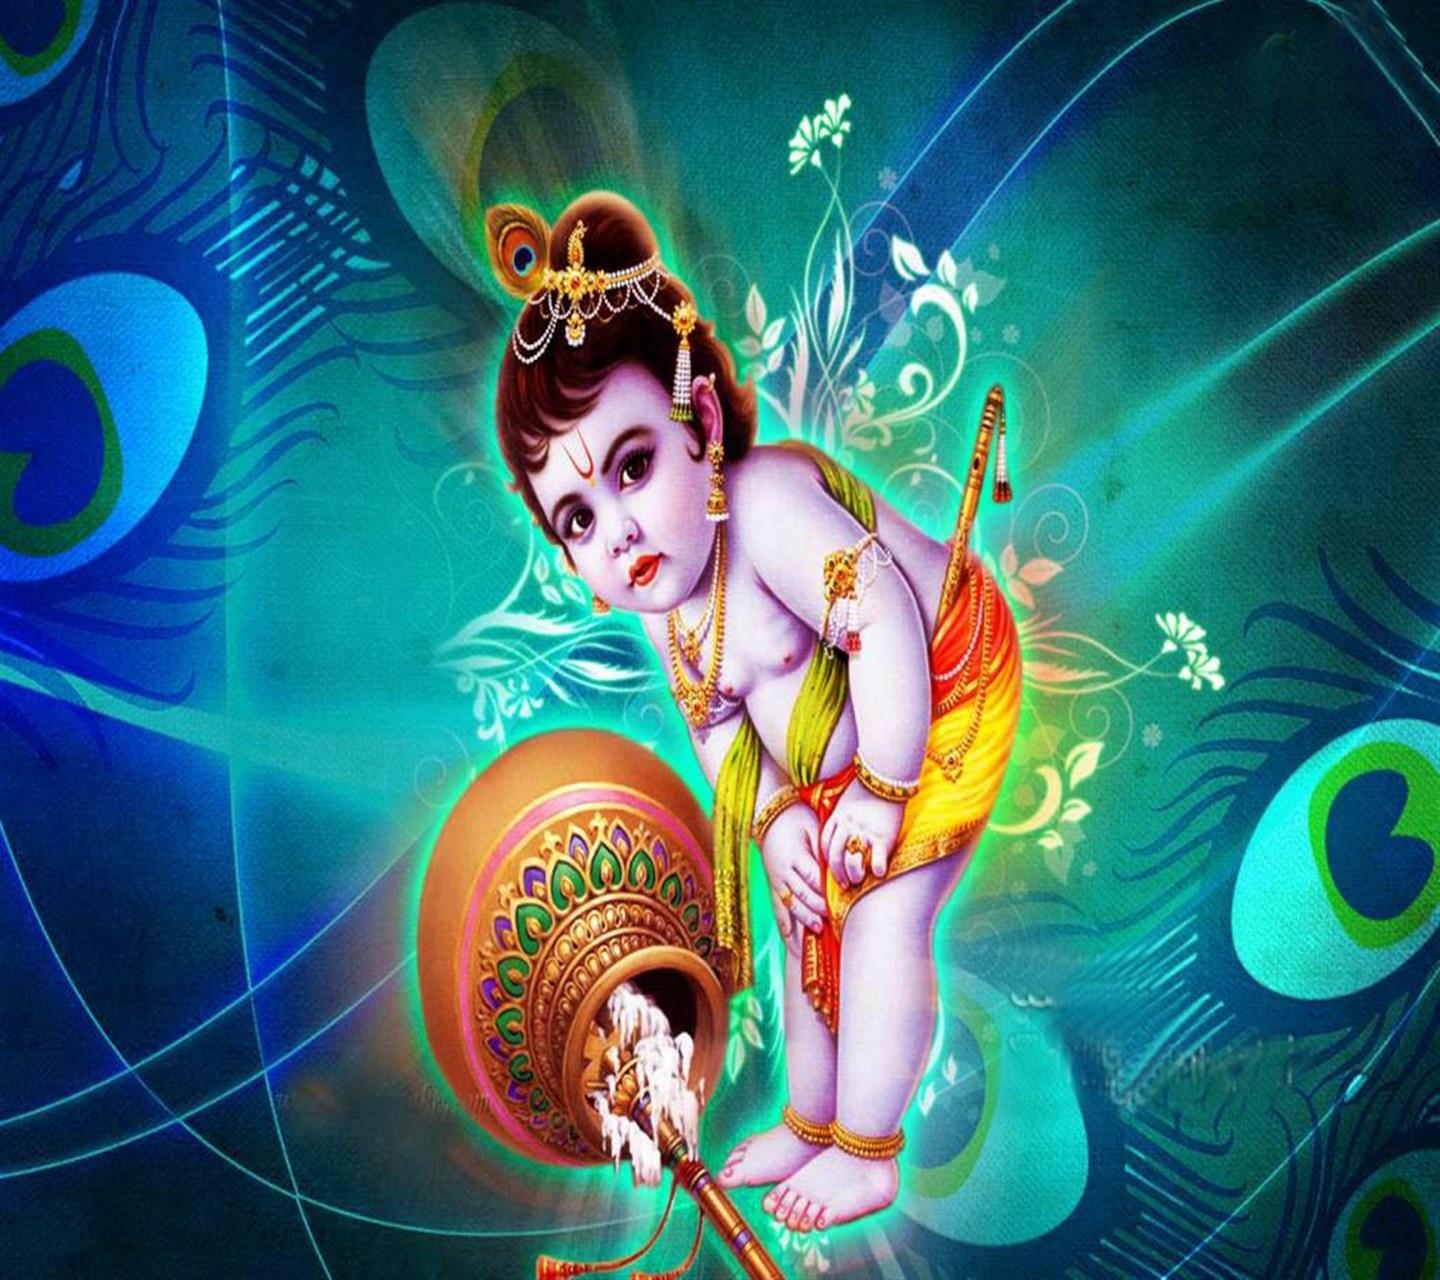 Download Bal krishna(1) - Diwali wallpapers for your mobile cell phone